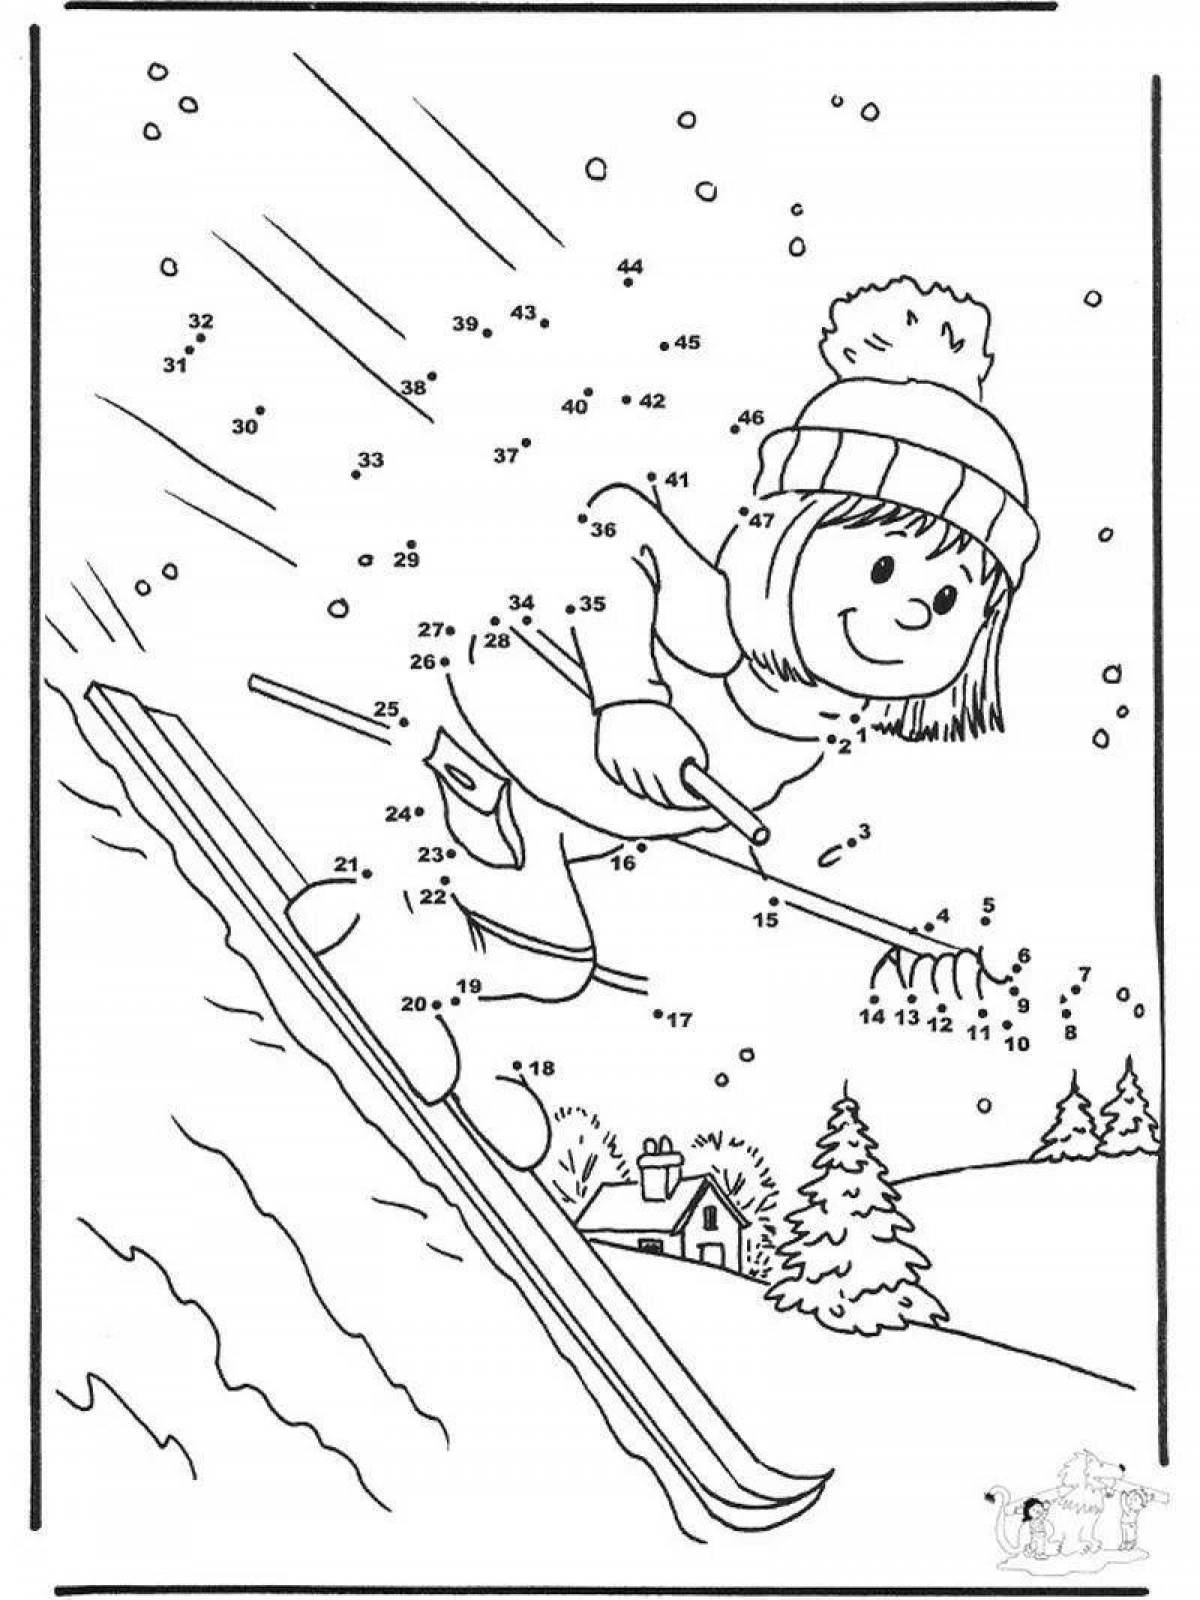 Dreamy coloring book signs of winter for kids